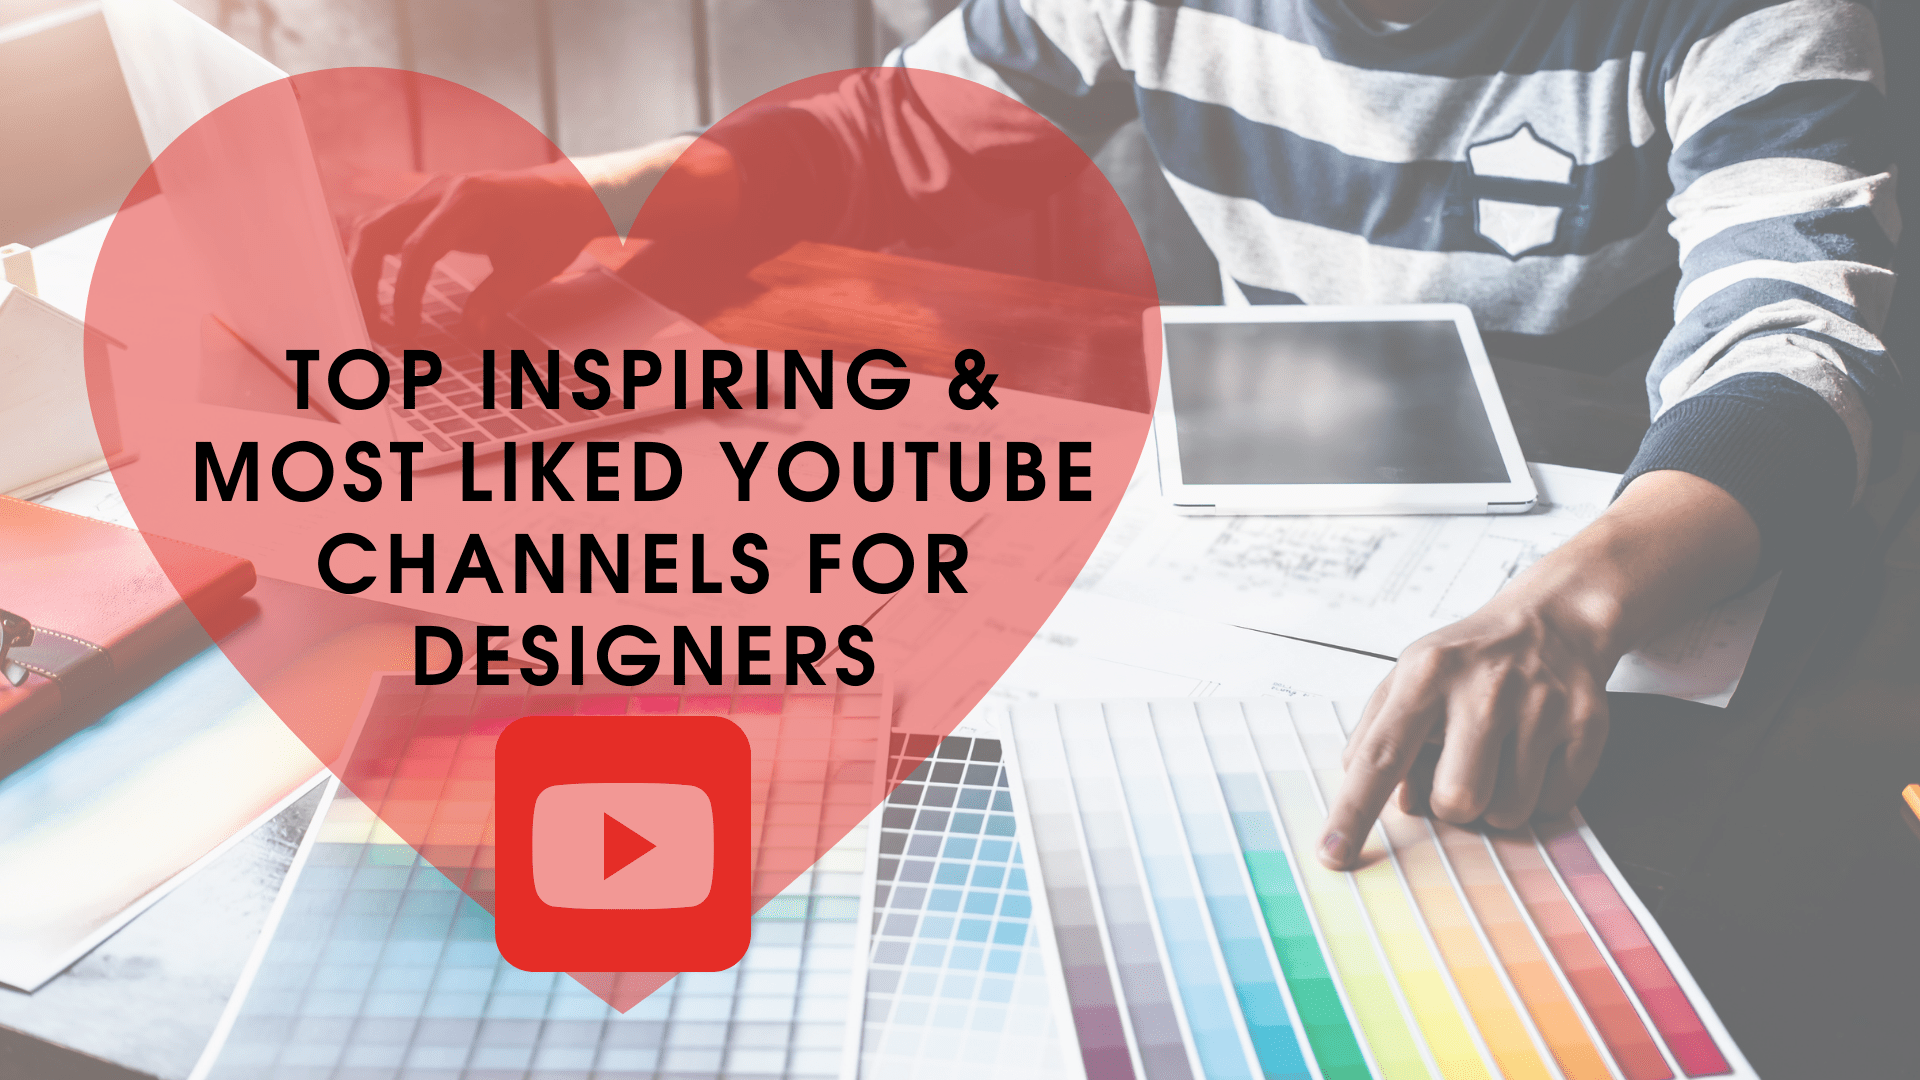 TOP Inspiring & Most Liked YouTube Channels for Designers